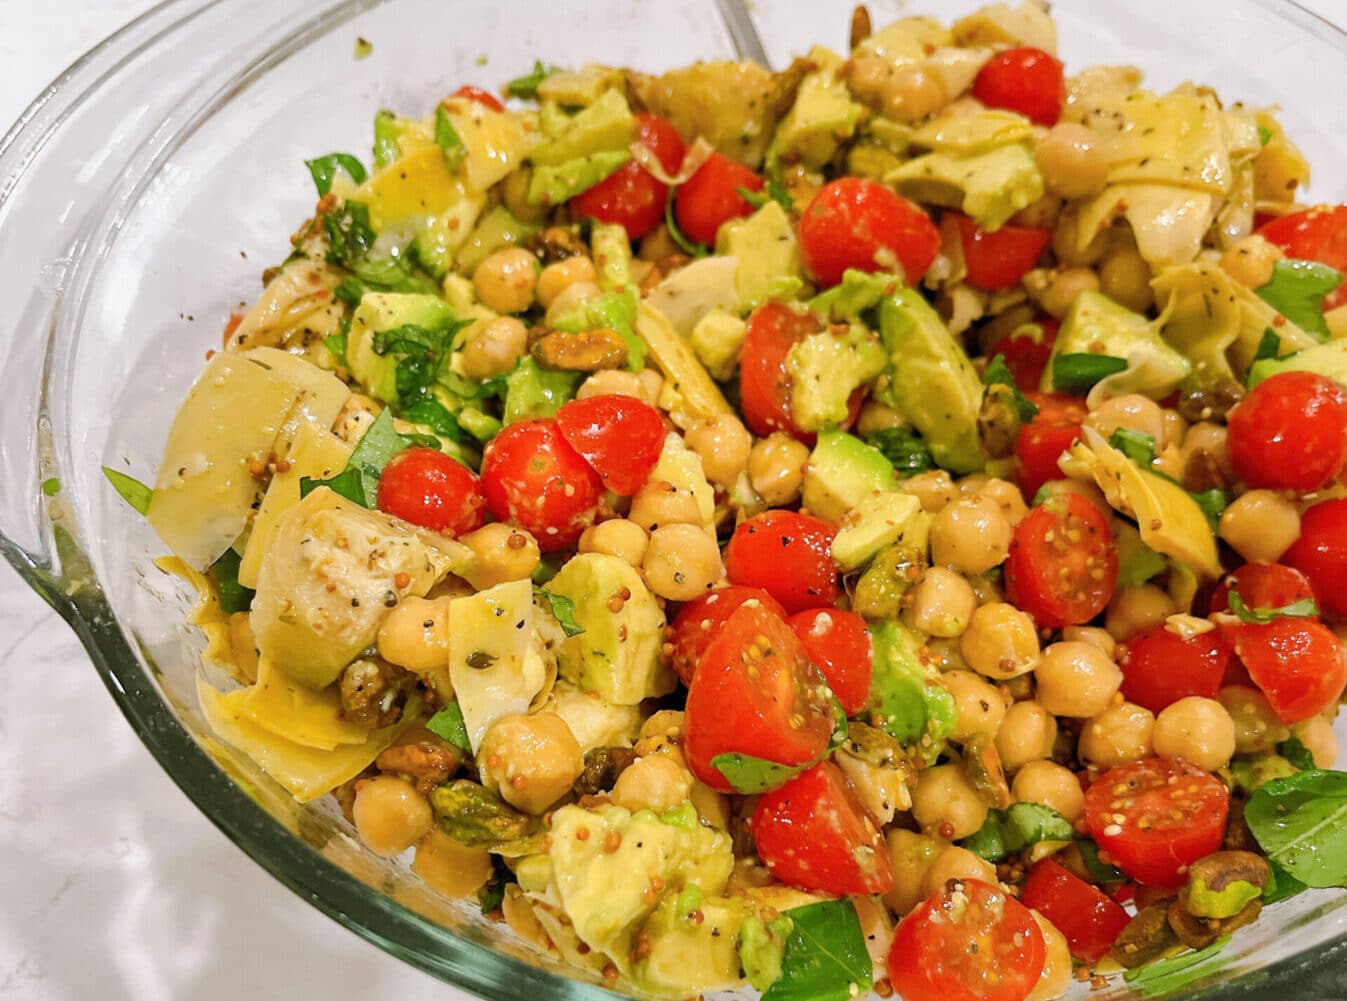 High-Protein Tomato & Basil Salad with Chickpeas